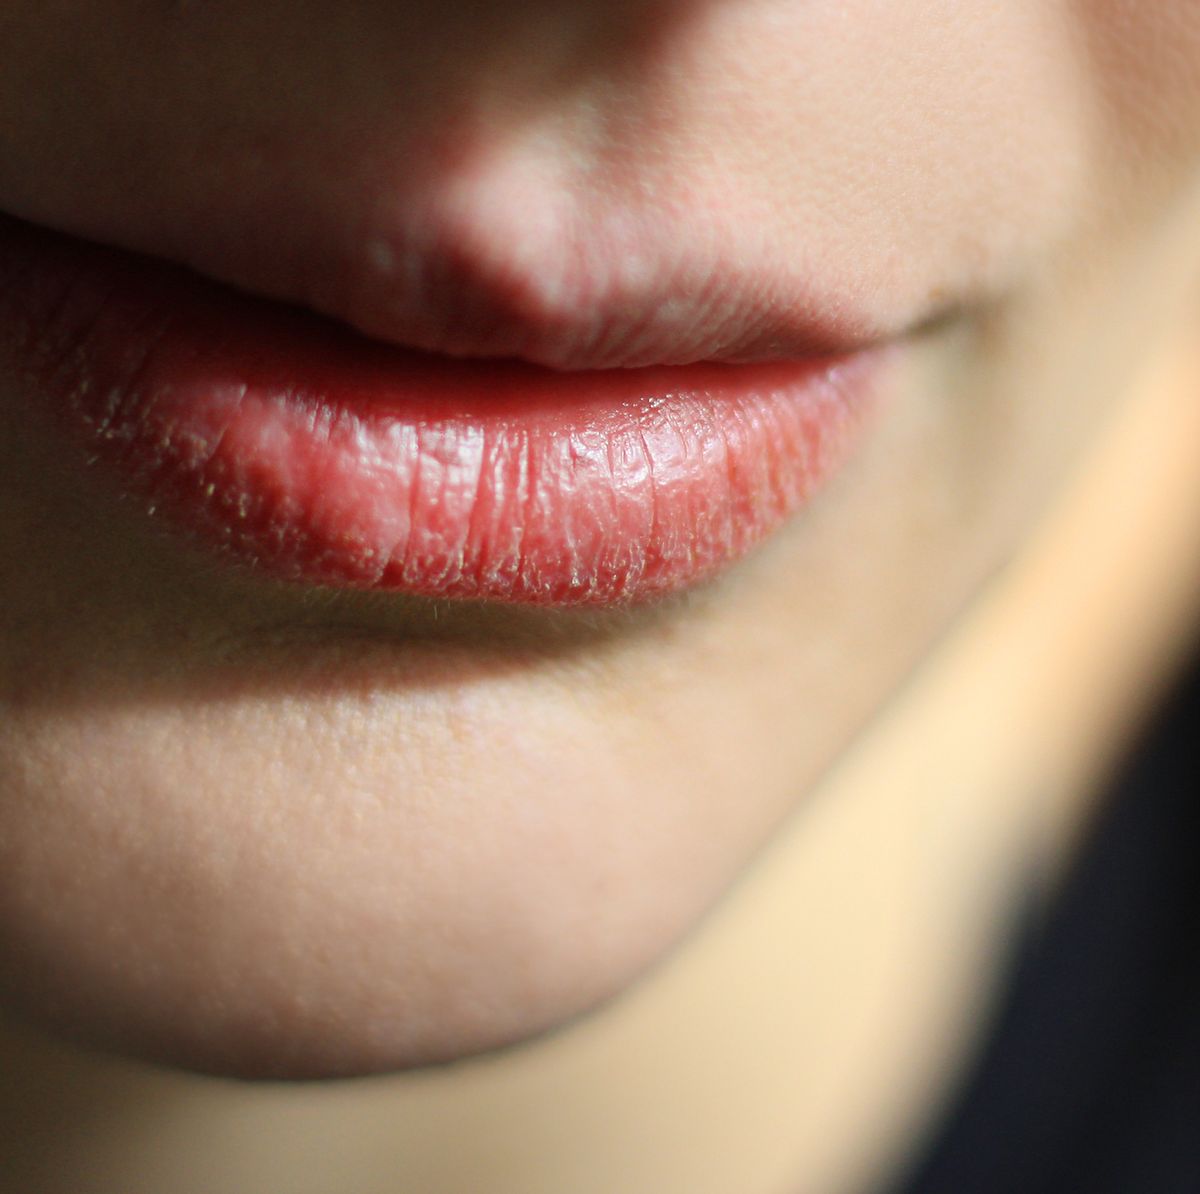 Chapped Lips Causes And Remedies, According To Dermatologists